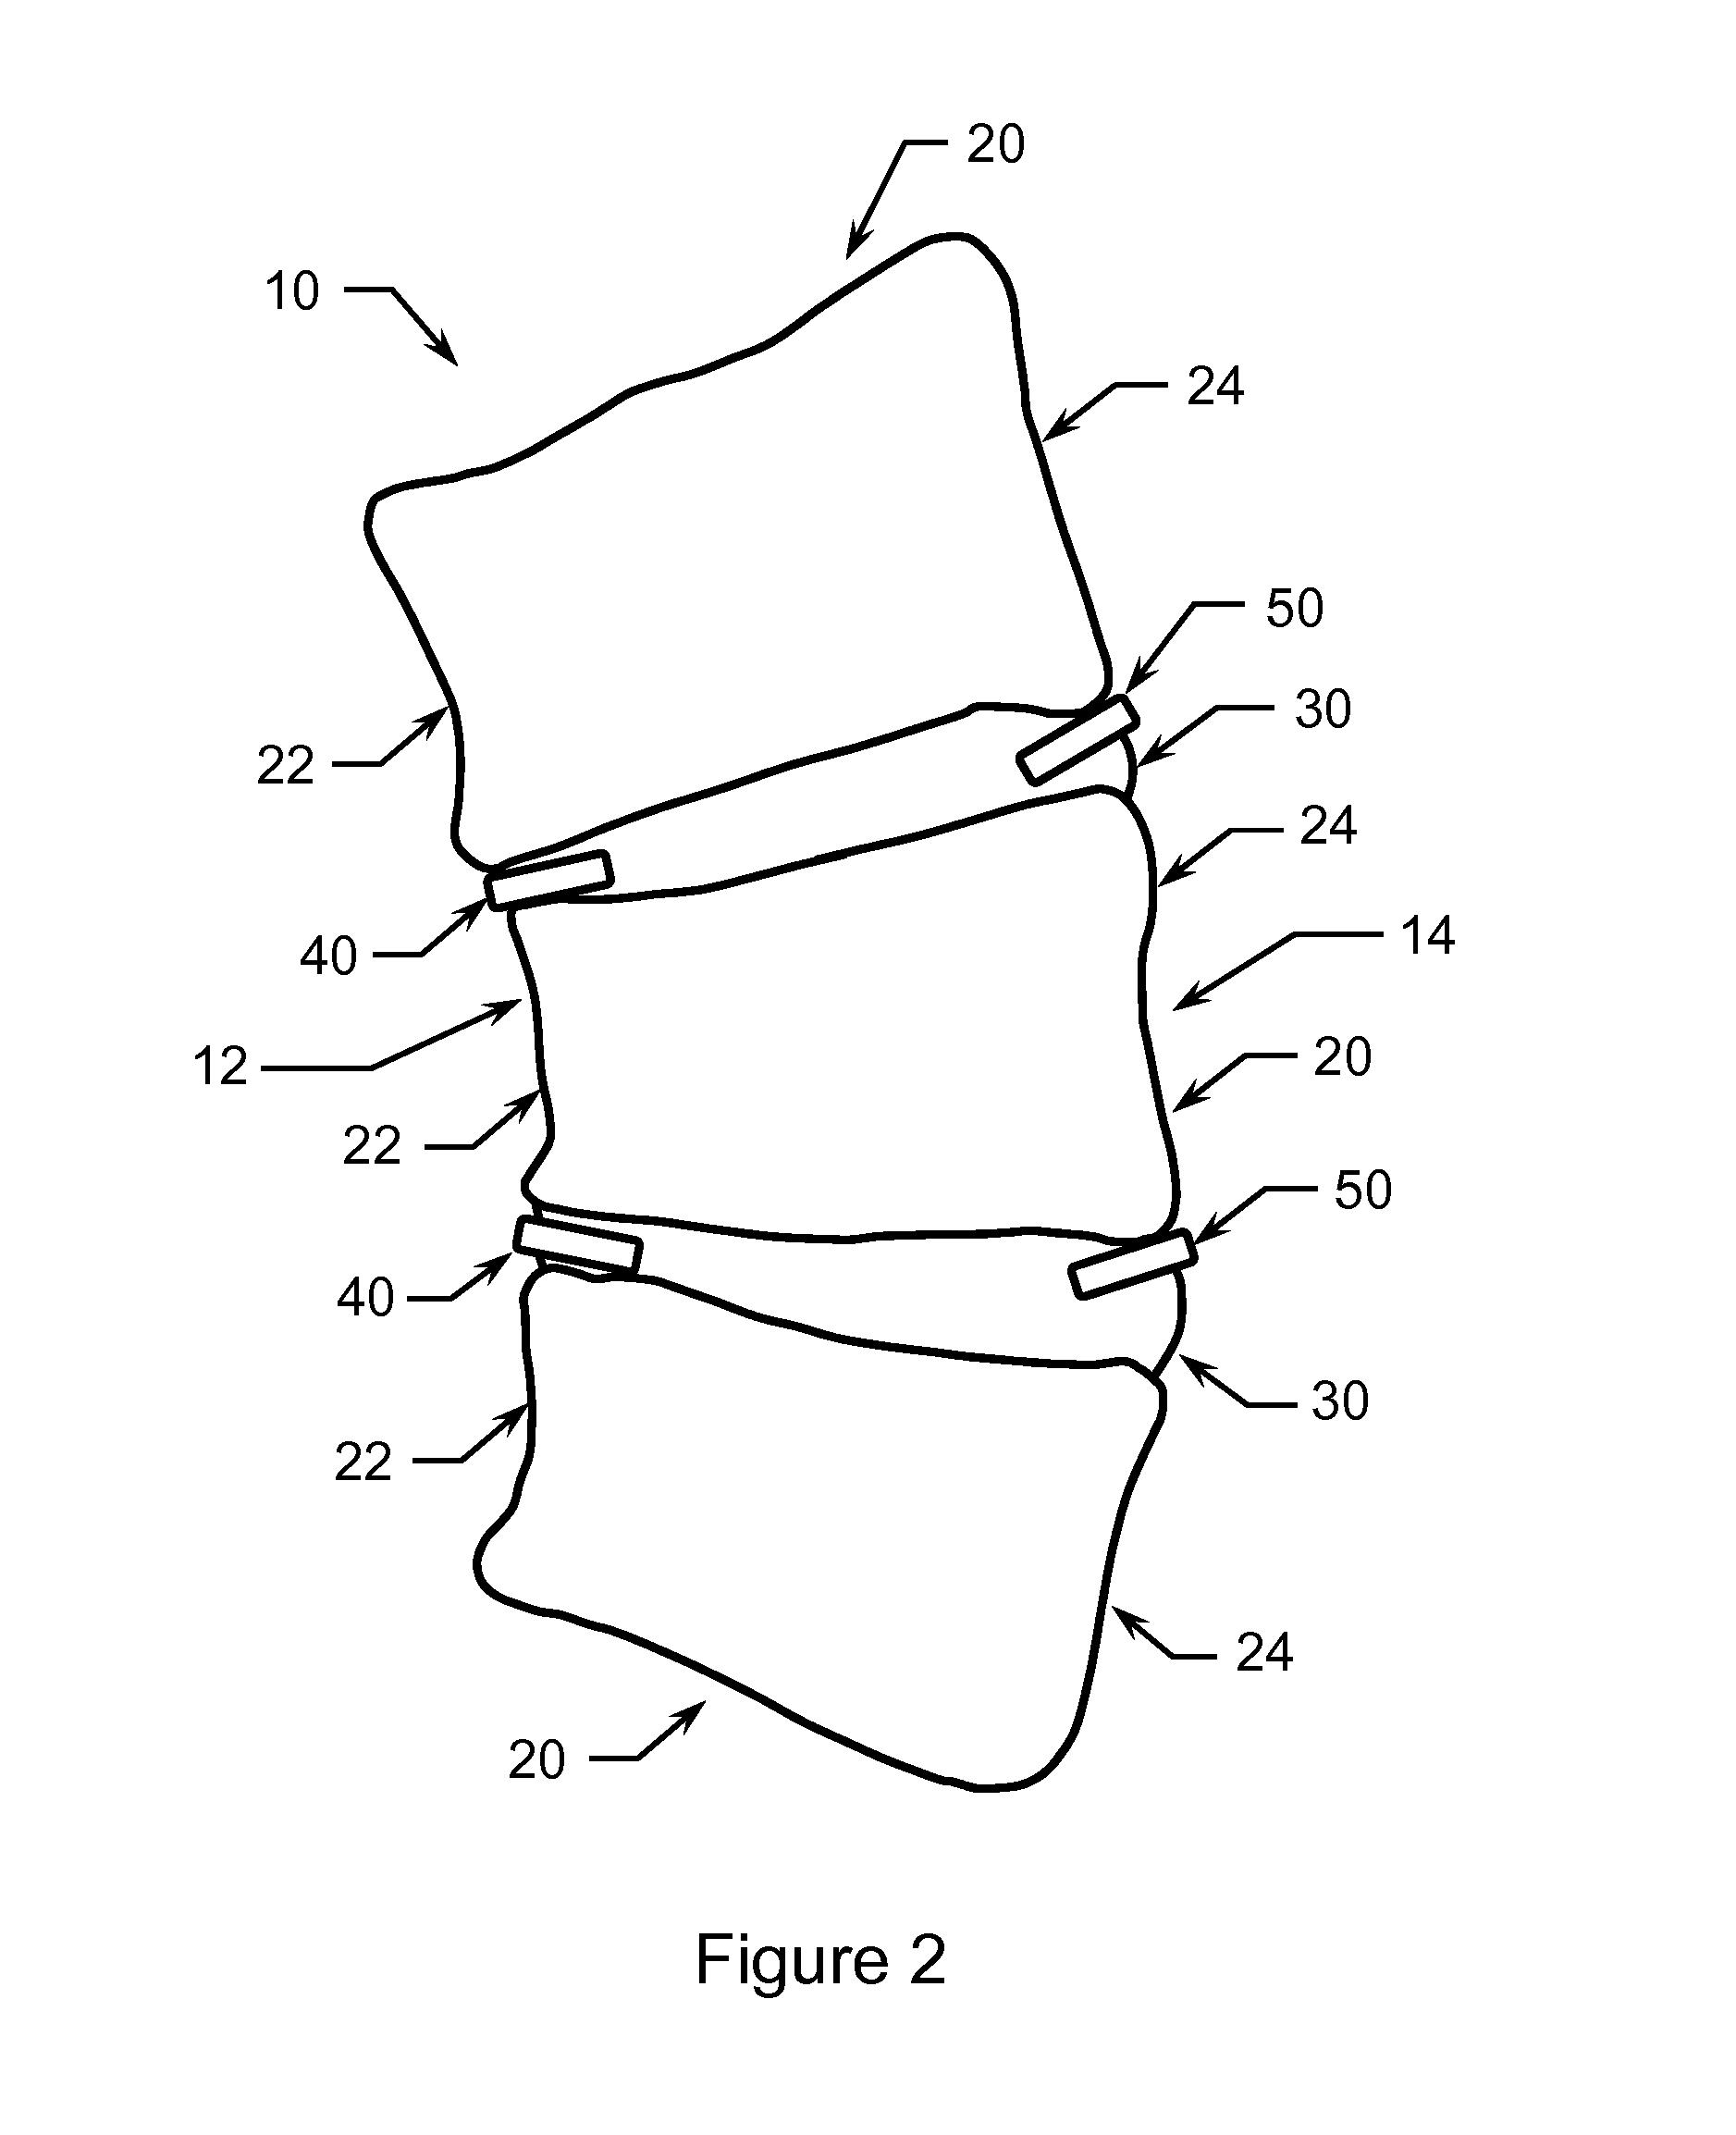 Method of Treating Scoliosis Using a Biological Implant